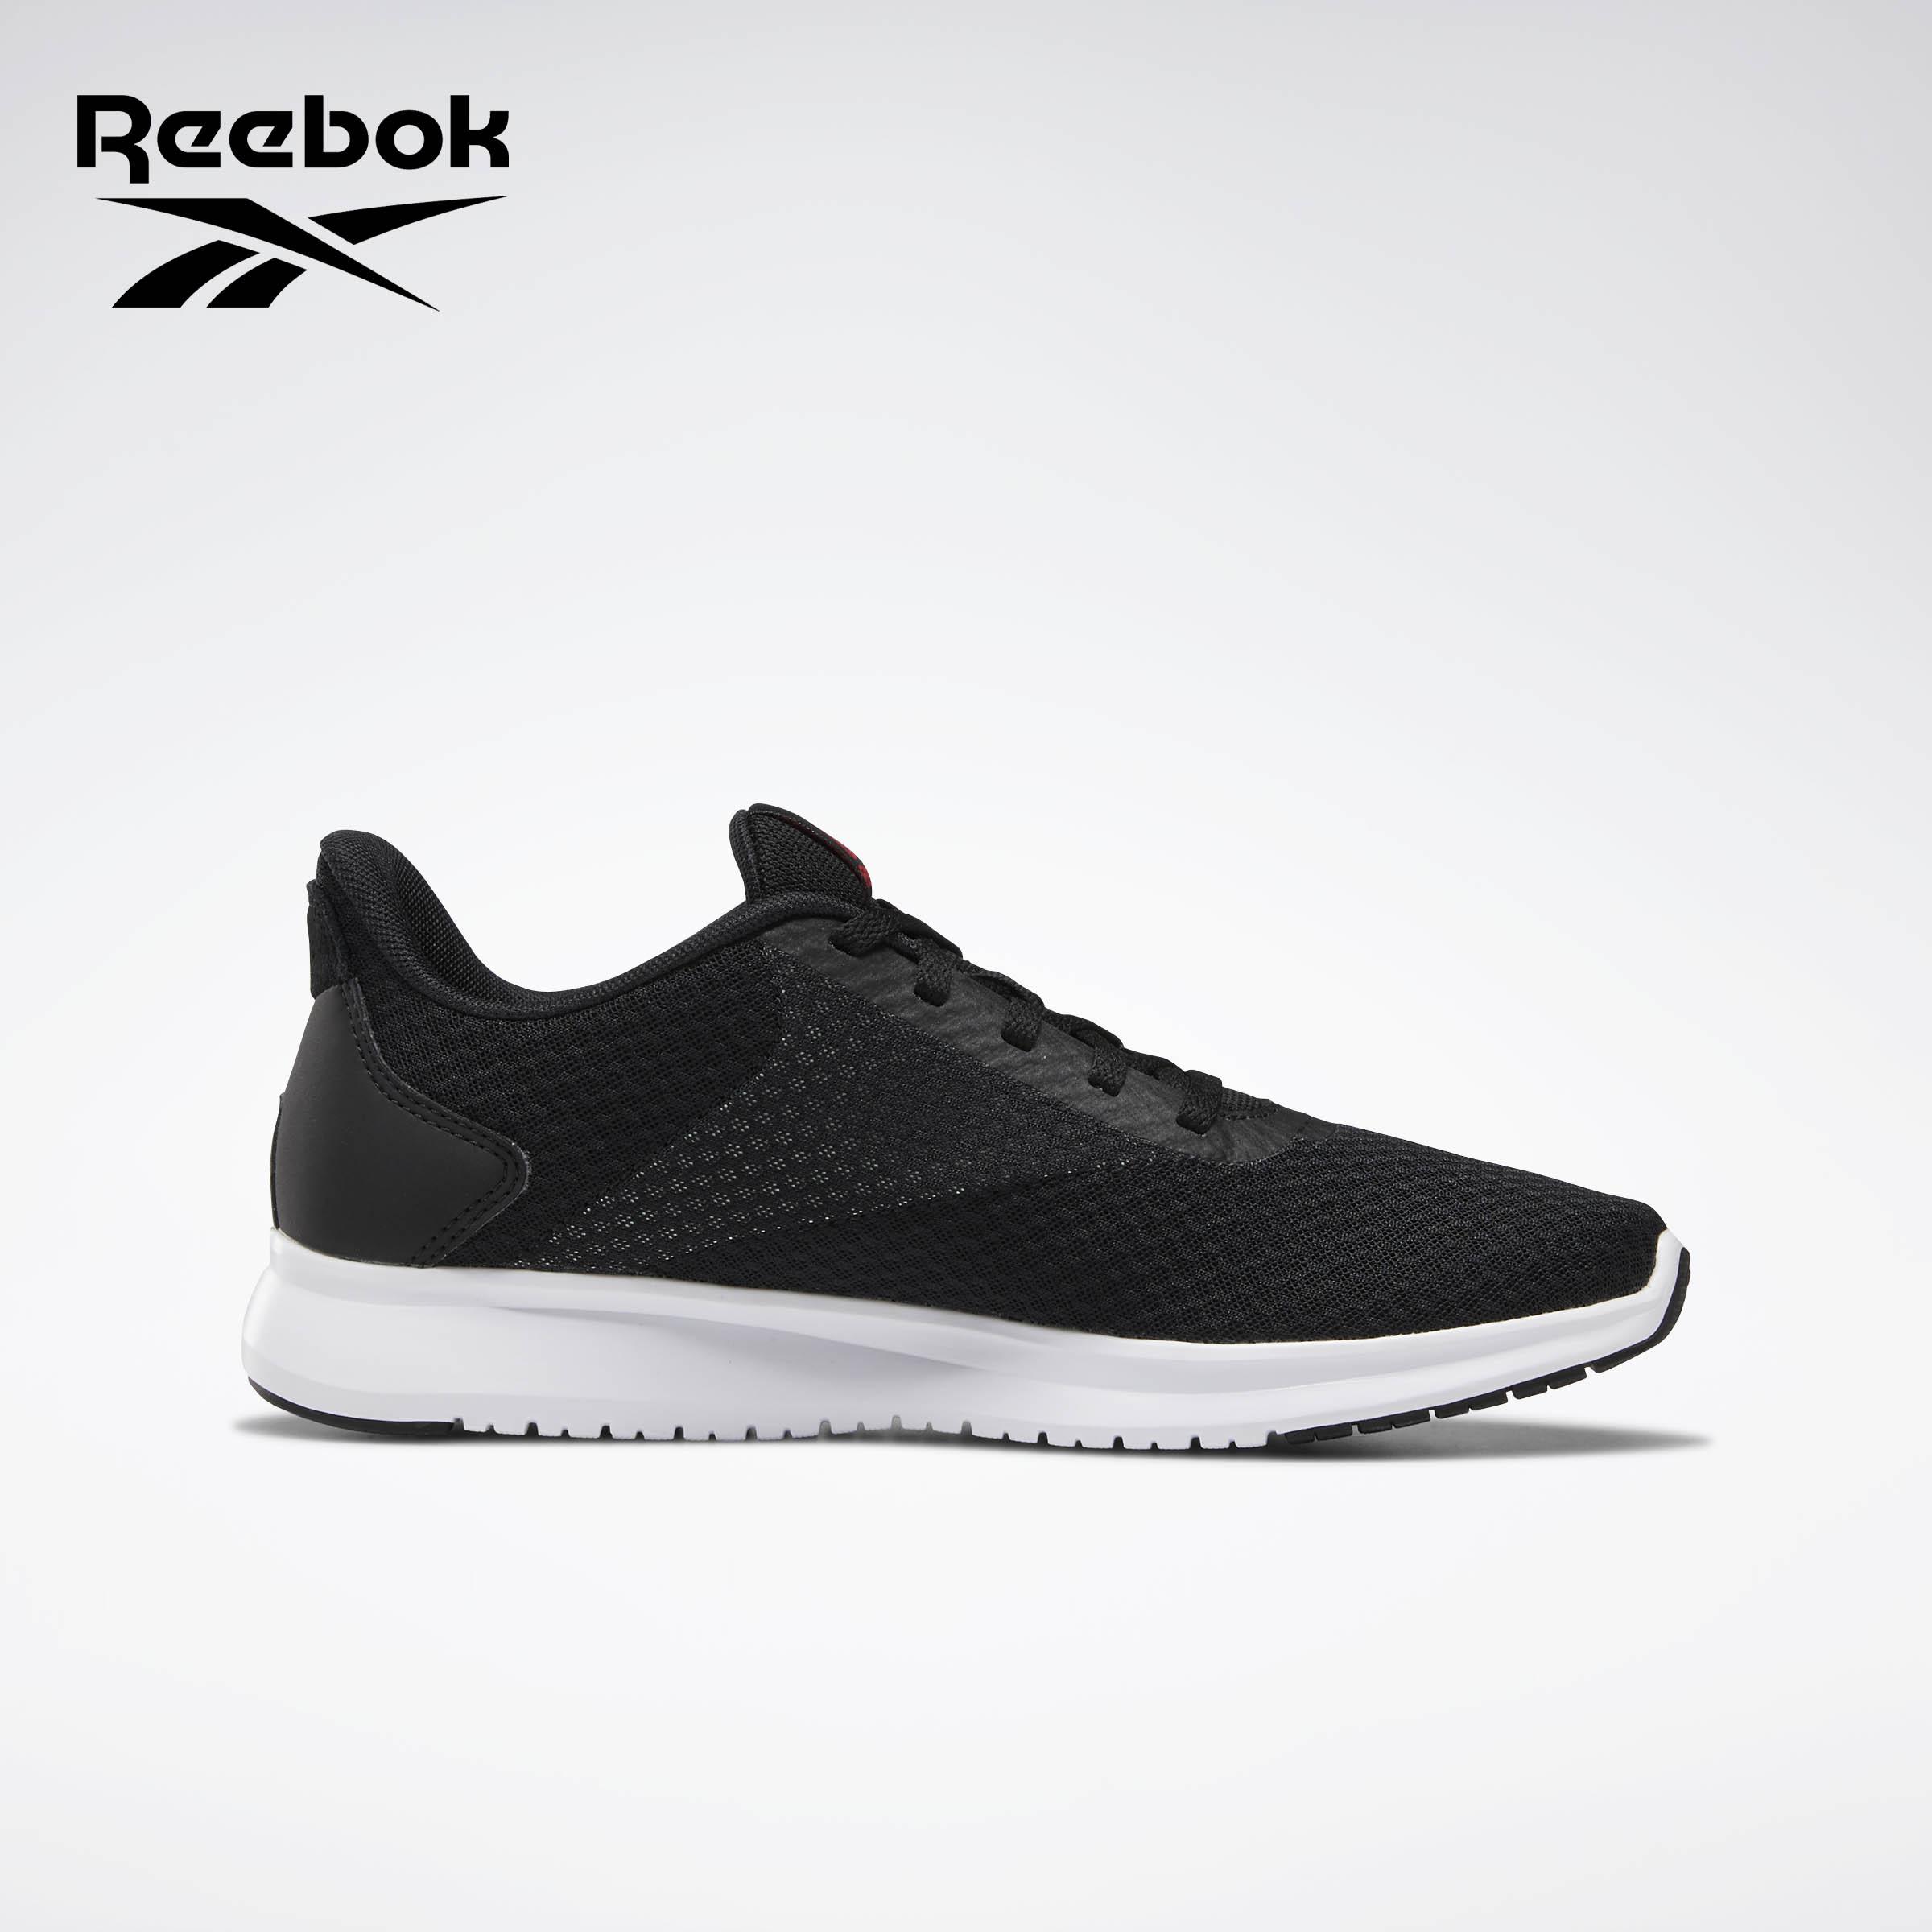 images of reebok shoes with price